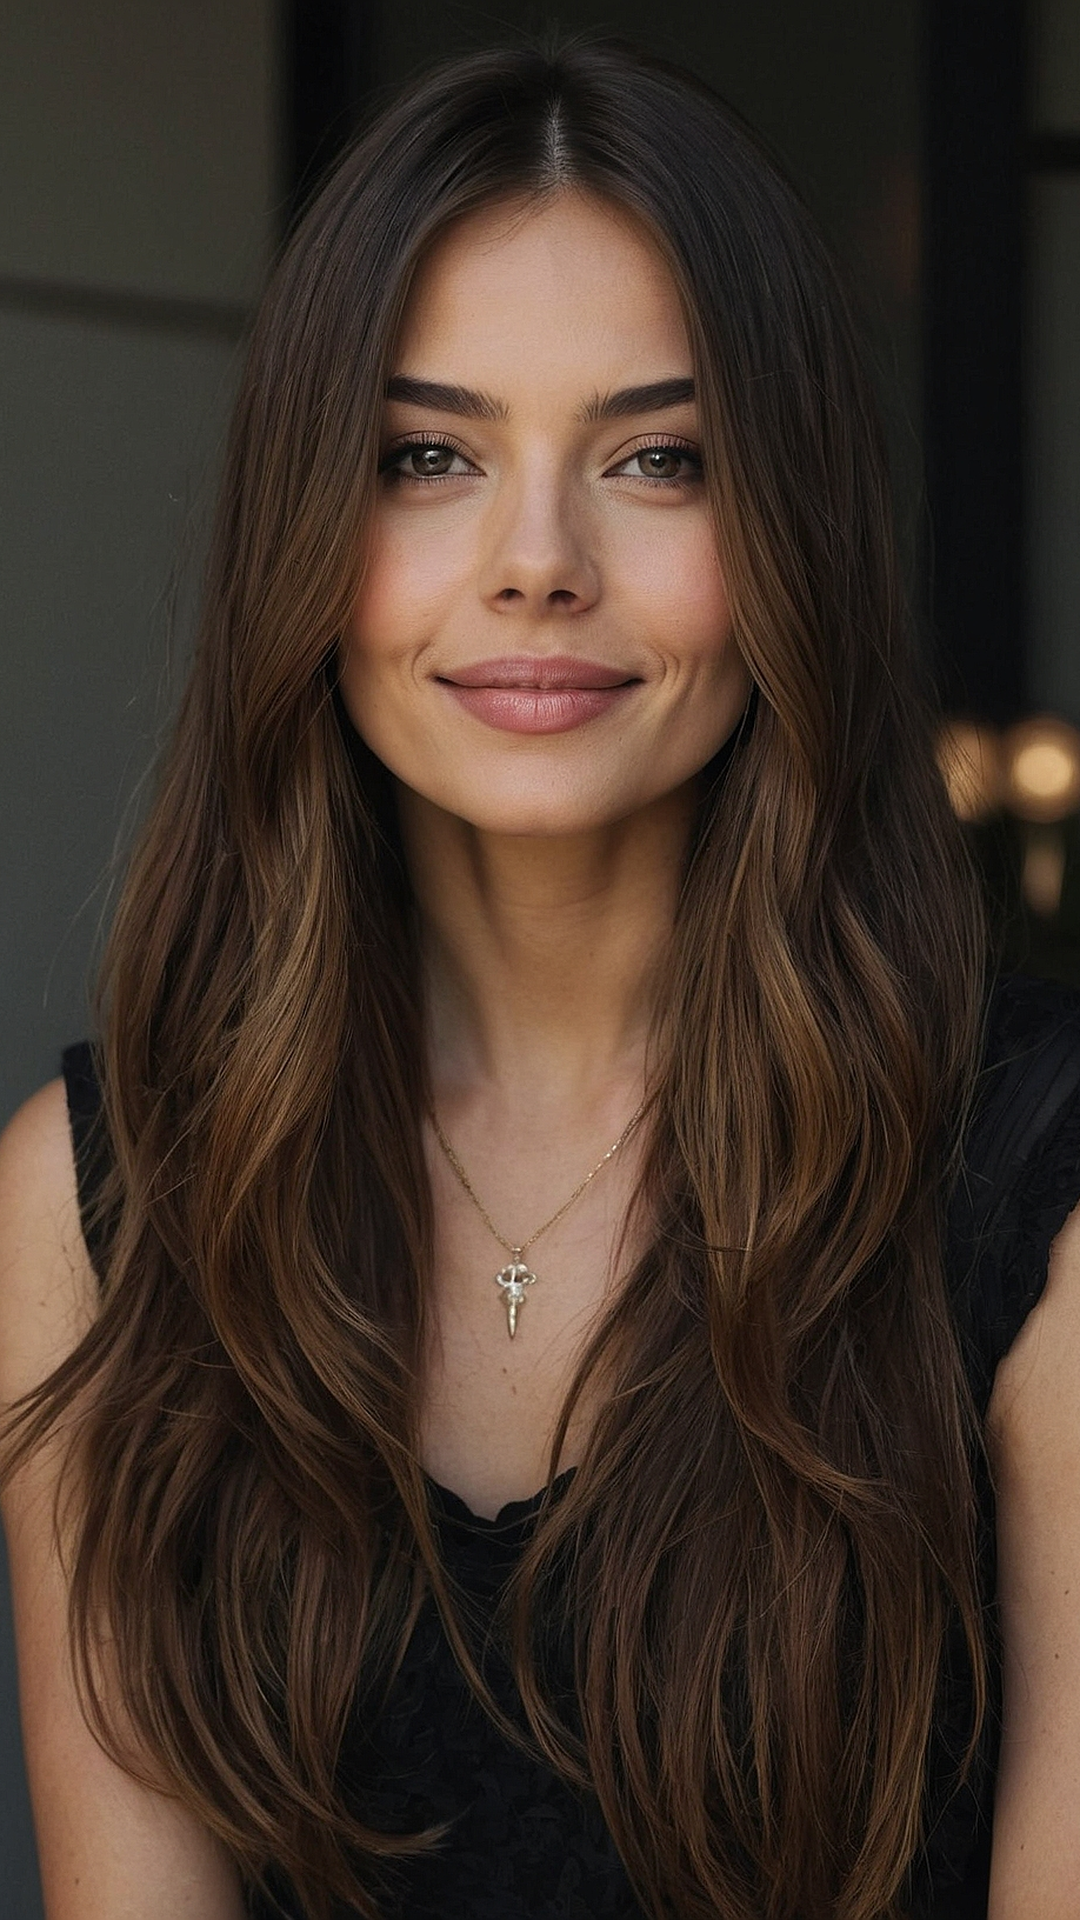 Straight and Stunning: Hair Ideas for Women